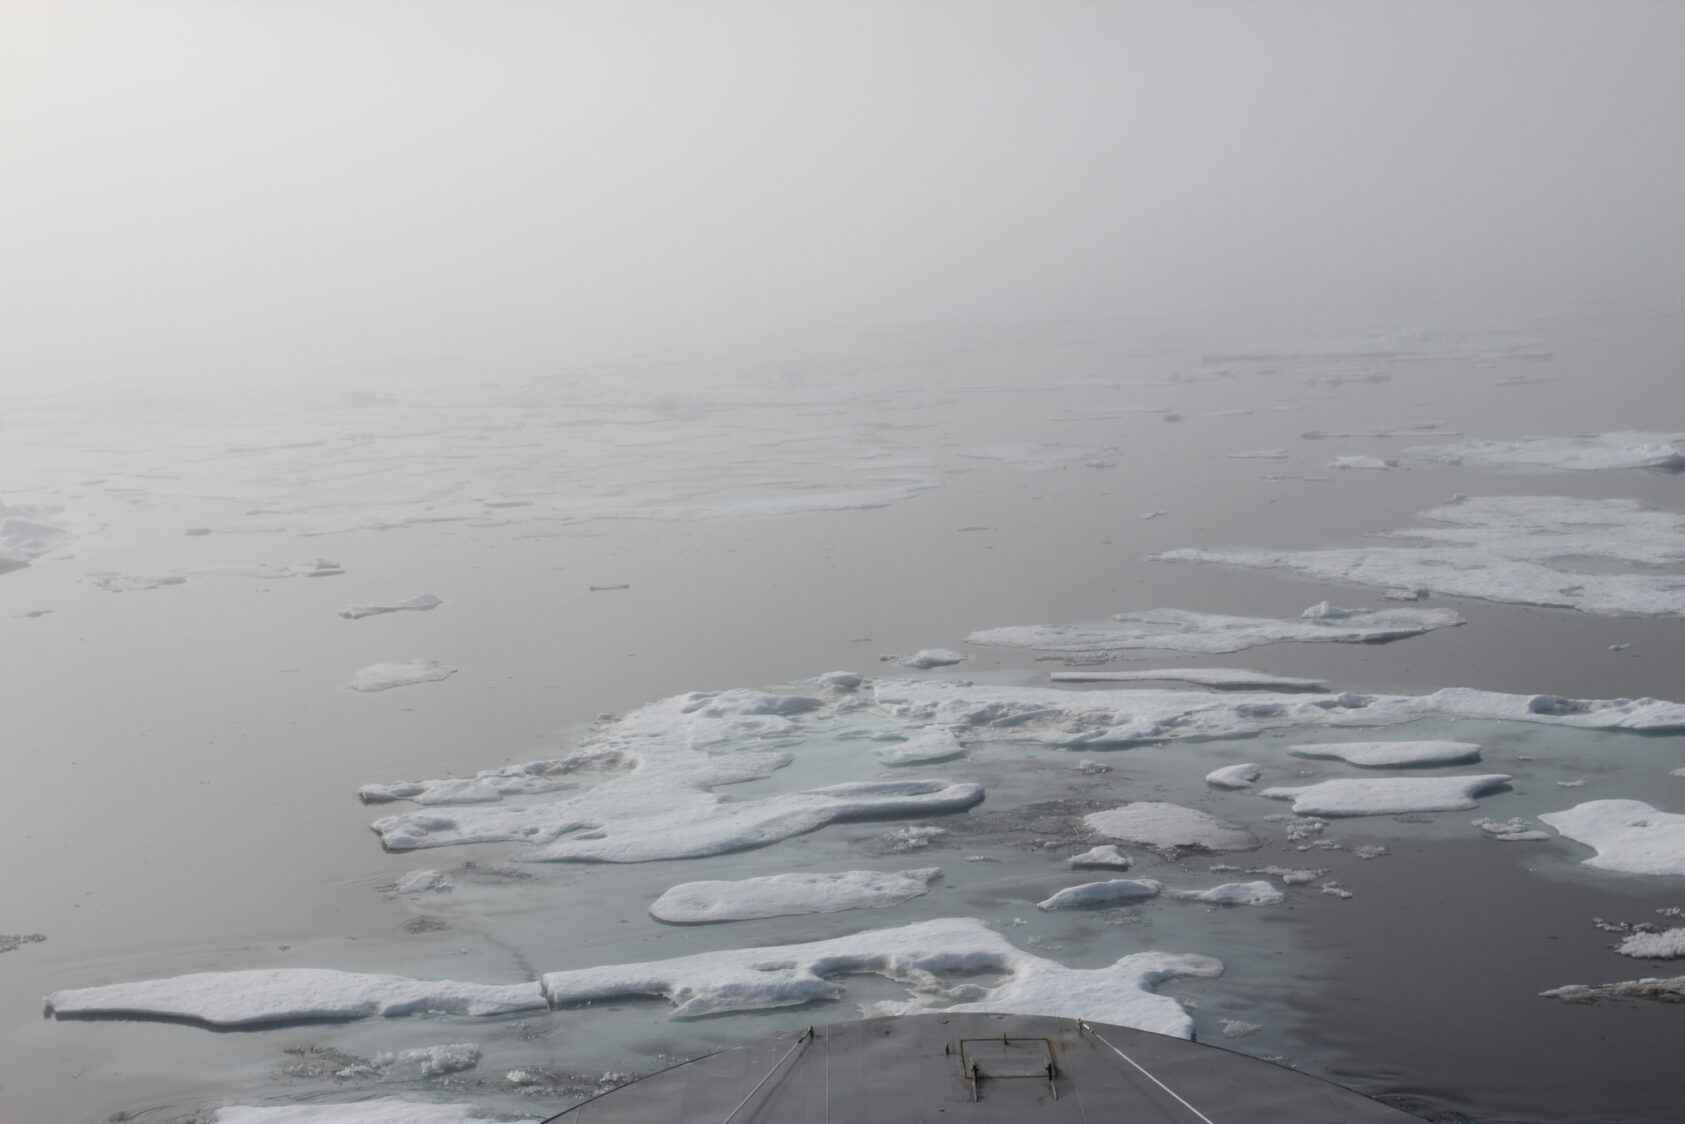 Ole Jakob Hegelund/IceWatch, A view of KV Svalbard´s path ahead on a foggy day in the Arctic Ocean north of Svalbard., Figure 22, , 